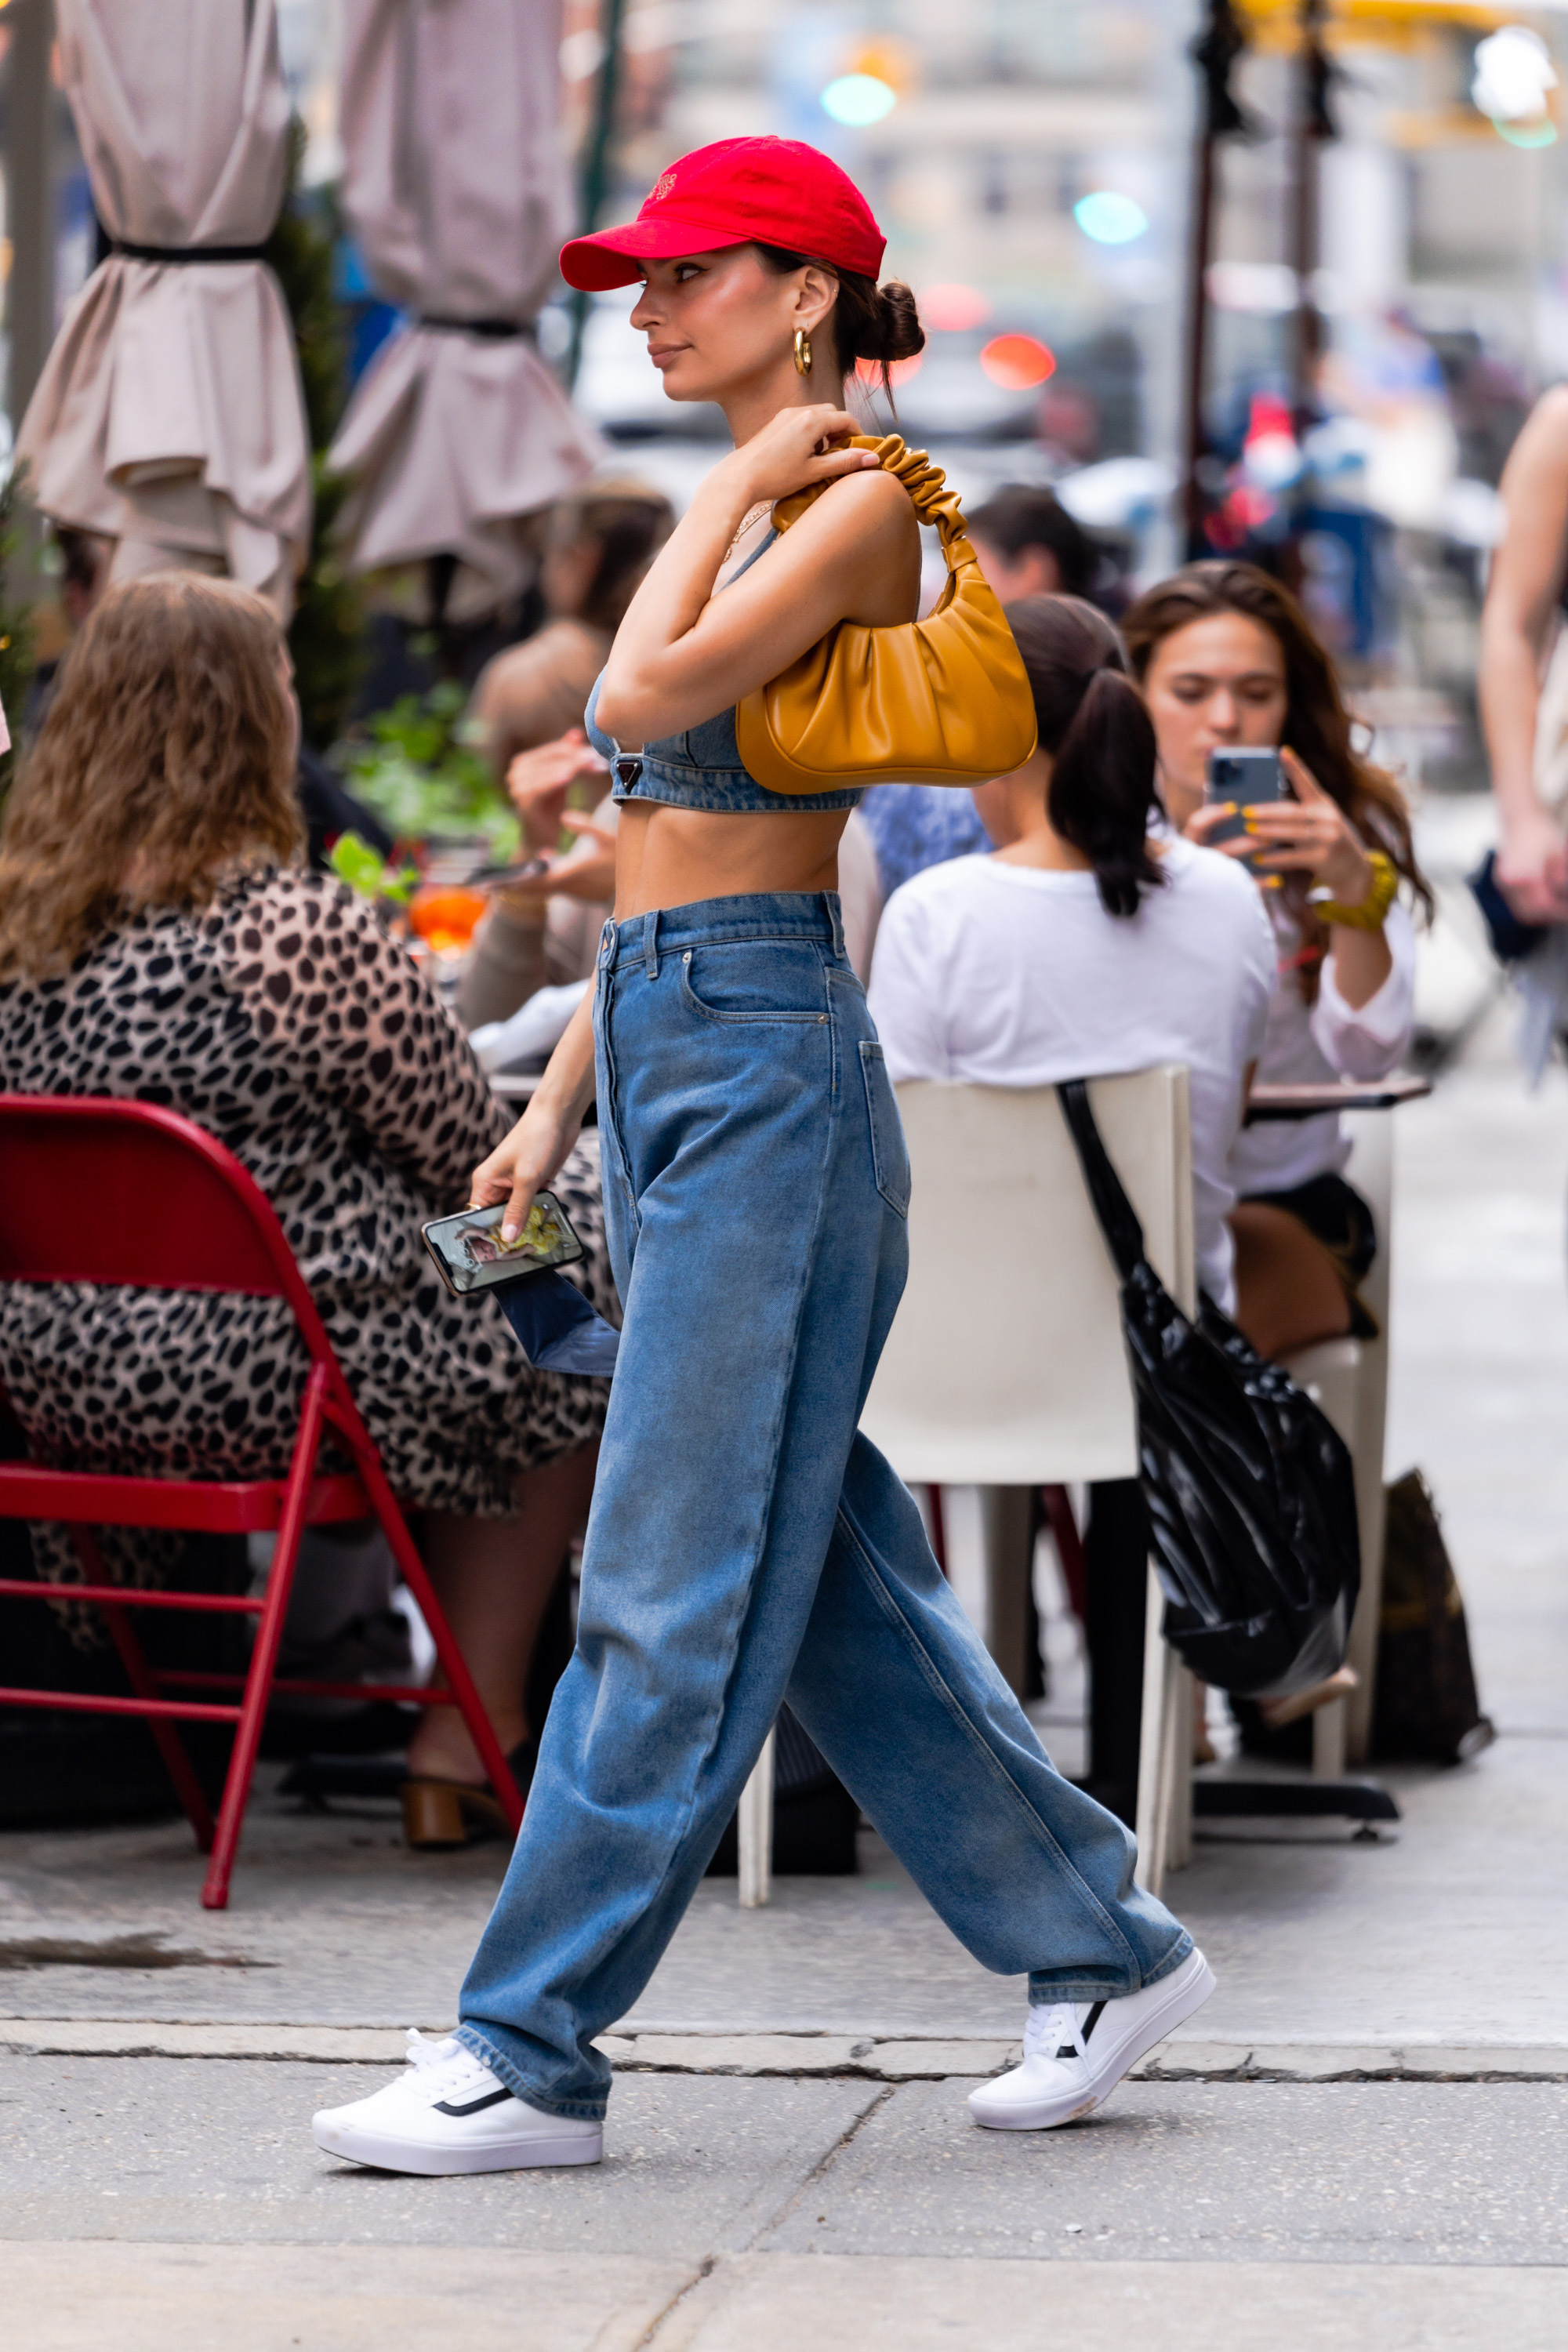 Emily Ratajkowski loves her $89 JW PEI shoulder bag so much she has it in  FOUR colors